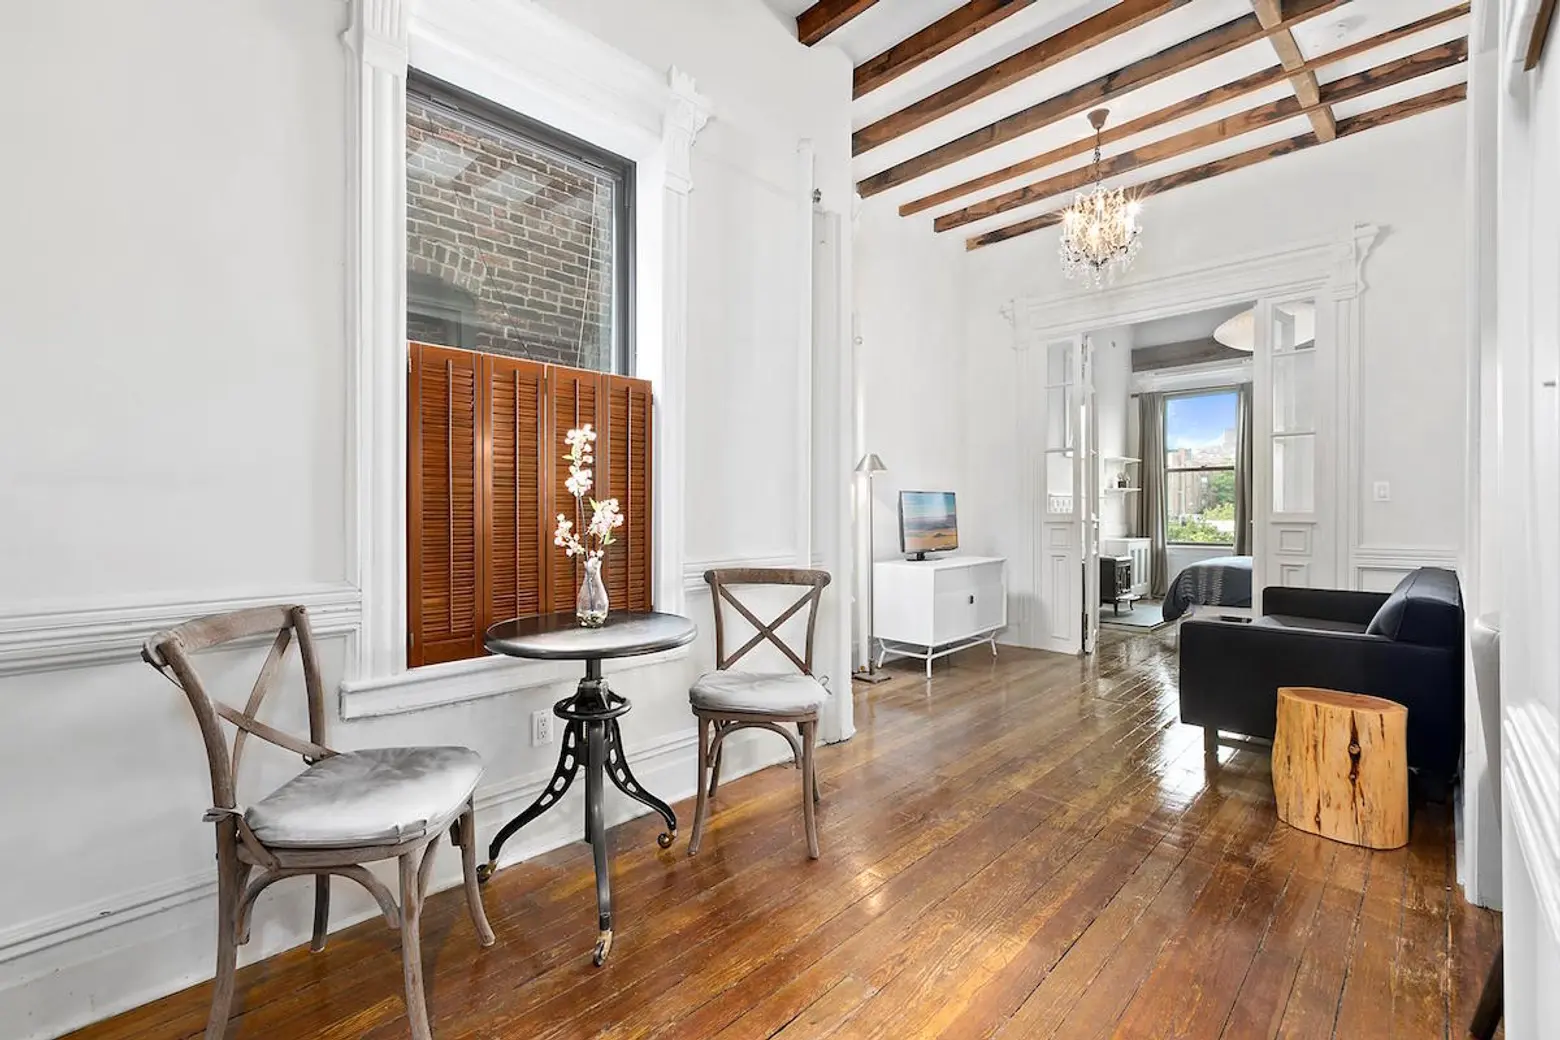 $975K West Village walk-up with lots of built-ins is the perfect size for one